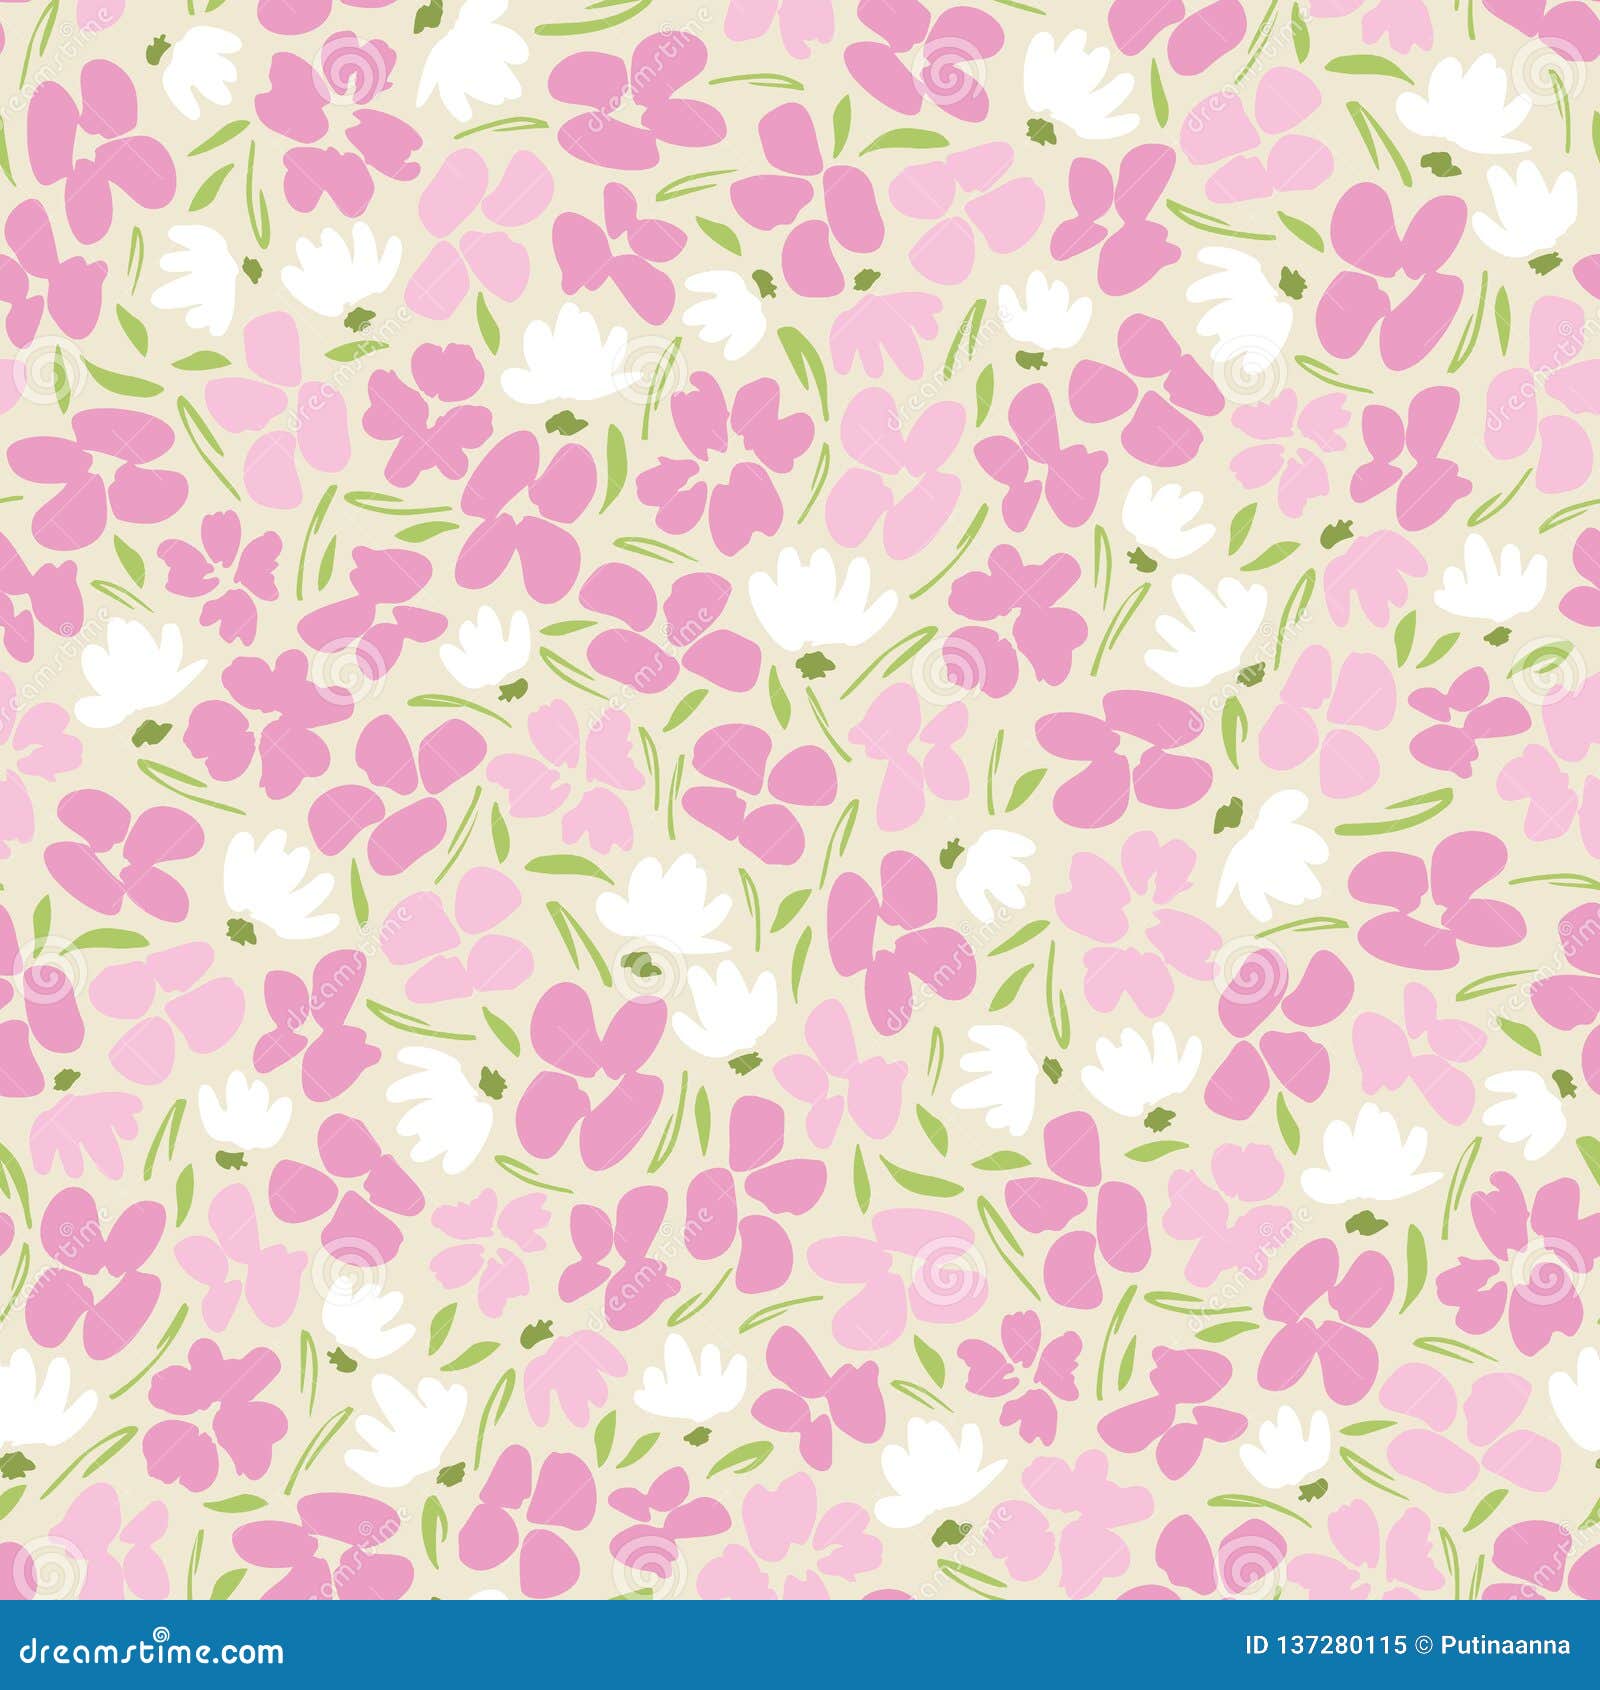 pastel colored graphic ditsy gestural blooms and foliage on white background  seamless pattern. floral texture